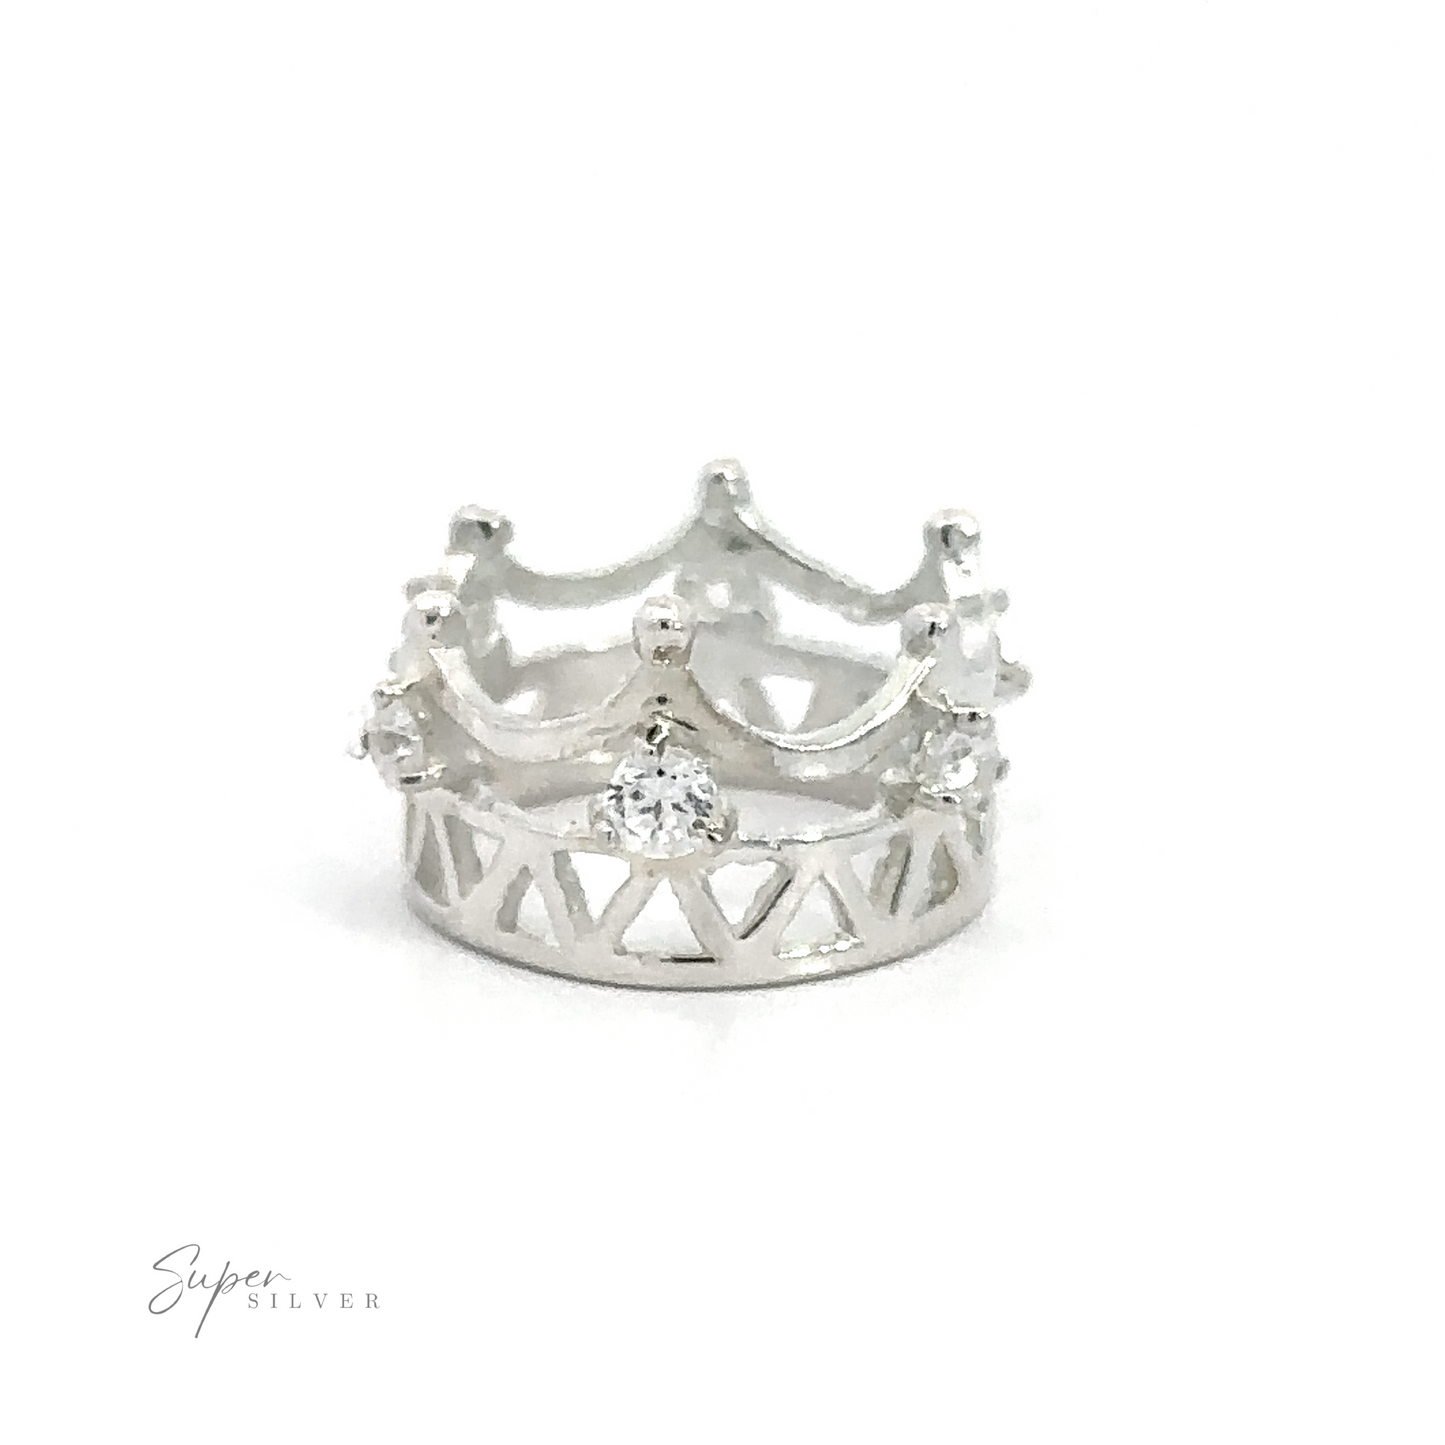 
                  
                    A silver ring designed to resemble a crown, adorned with small diamonds, exuding the elegance of a Cubic Zirconia Crown Pendant. The "Super Silver" logo is visible in the lower left corner.
                  
                